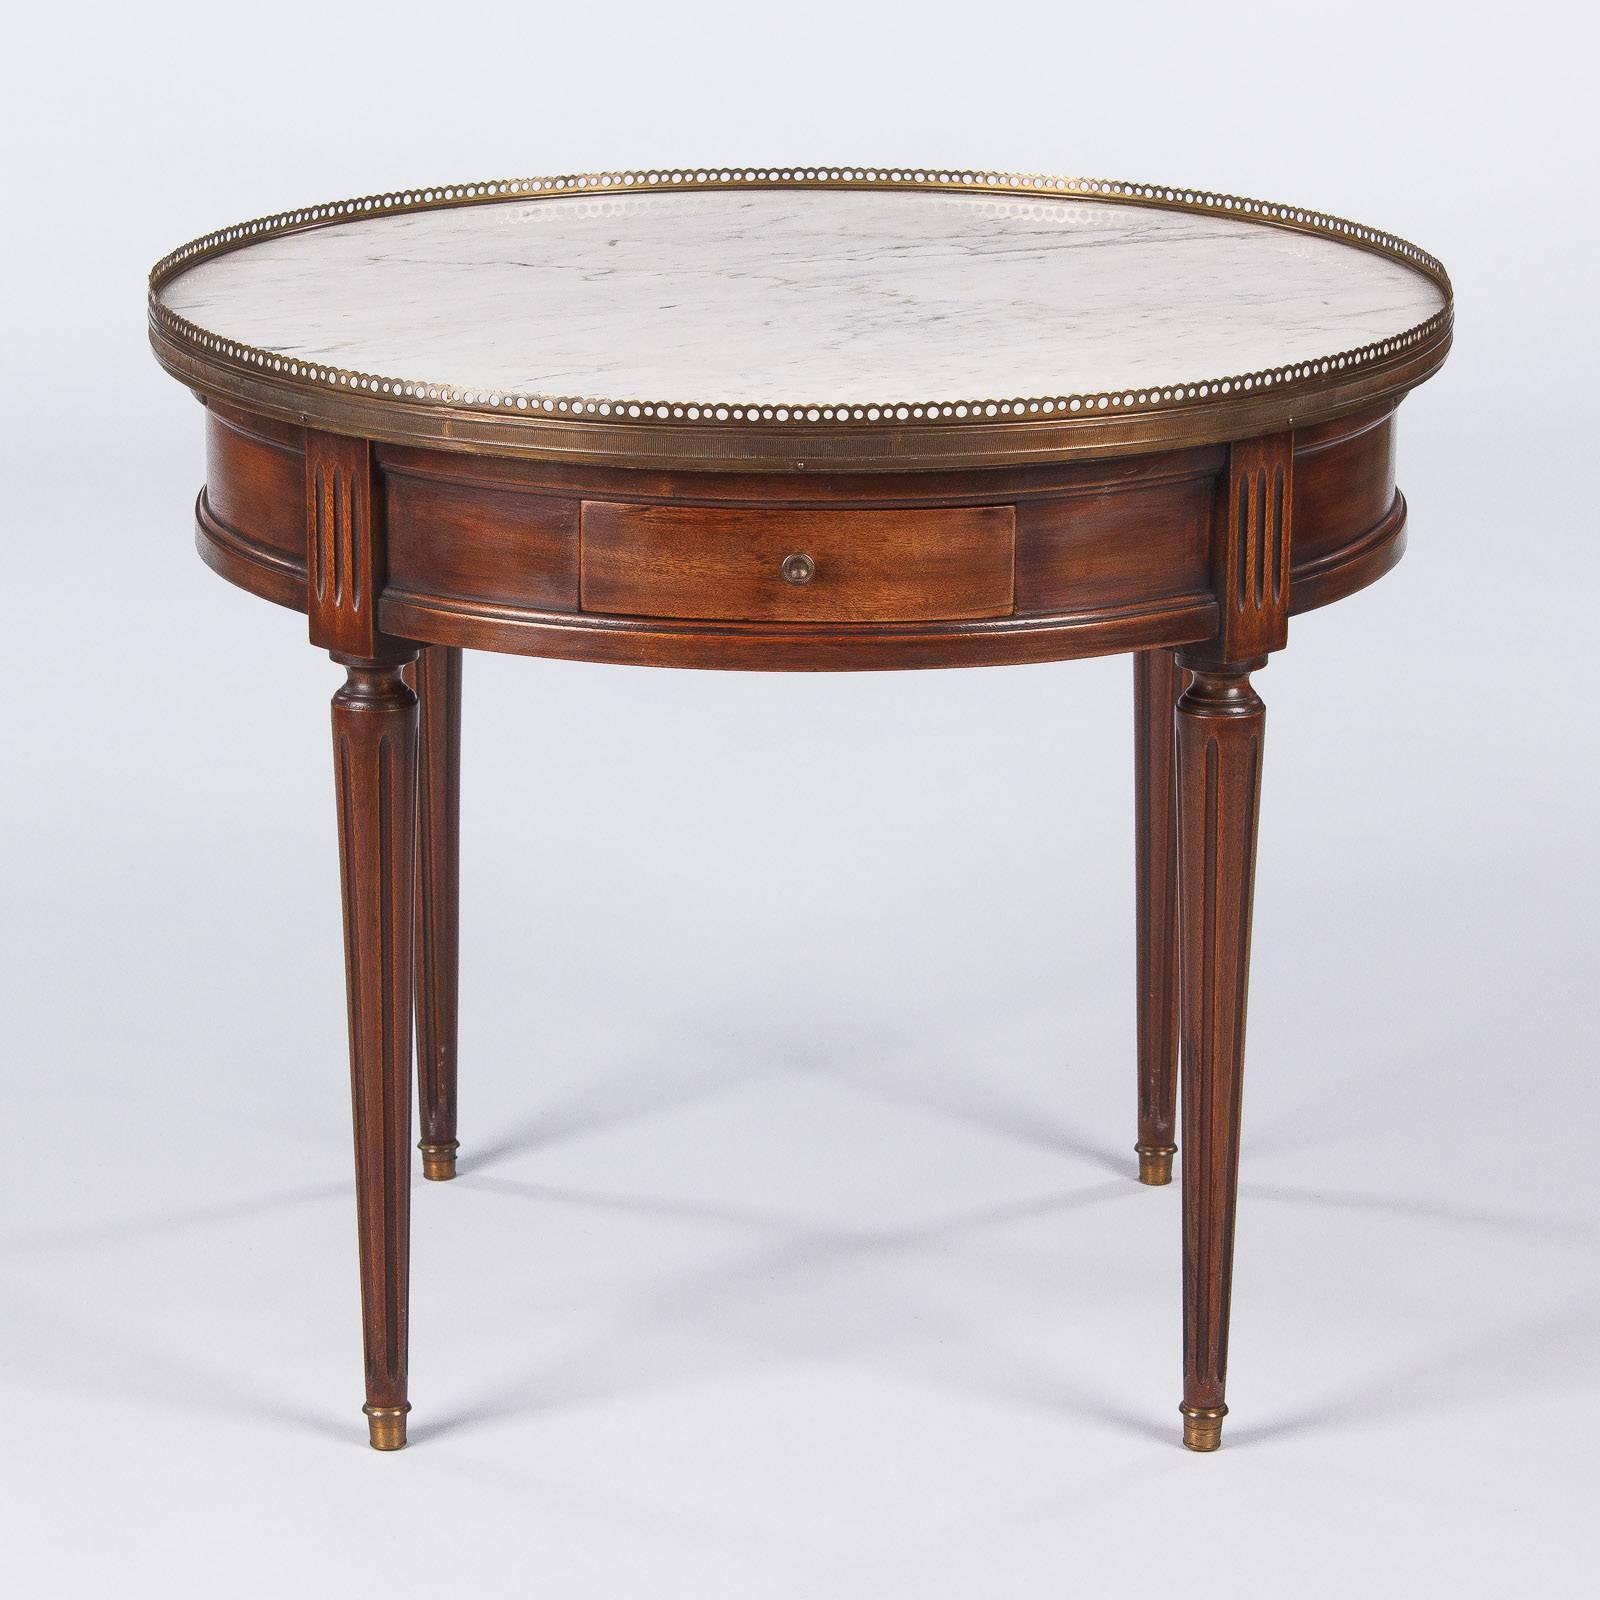 French Louis XVI Style Marble-Top Coffee or Side Table, Early 1900s